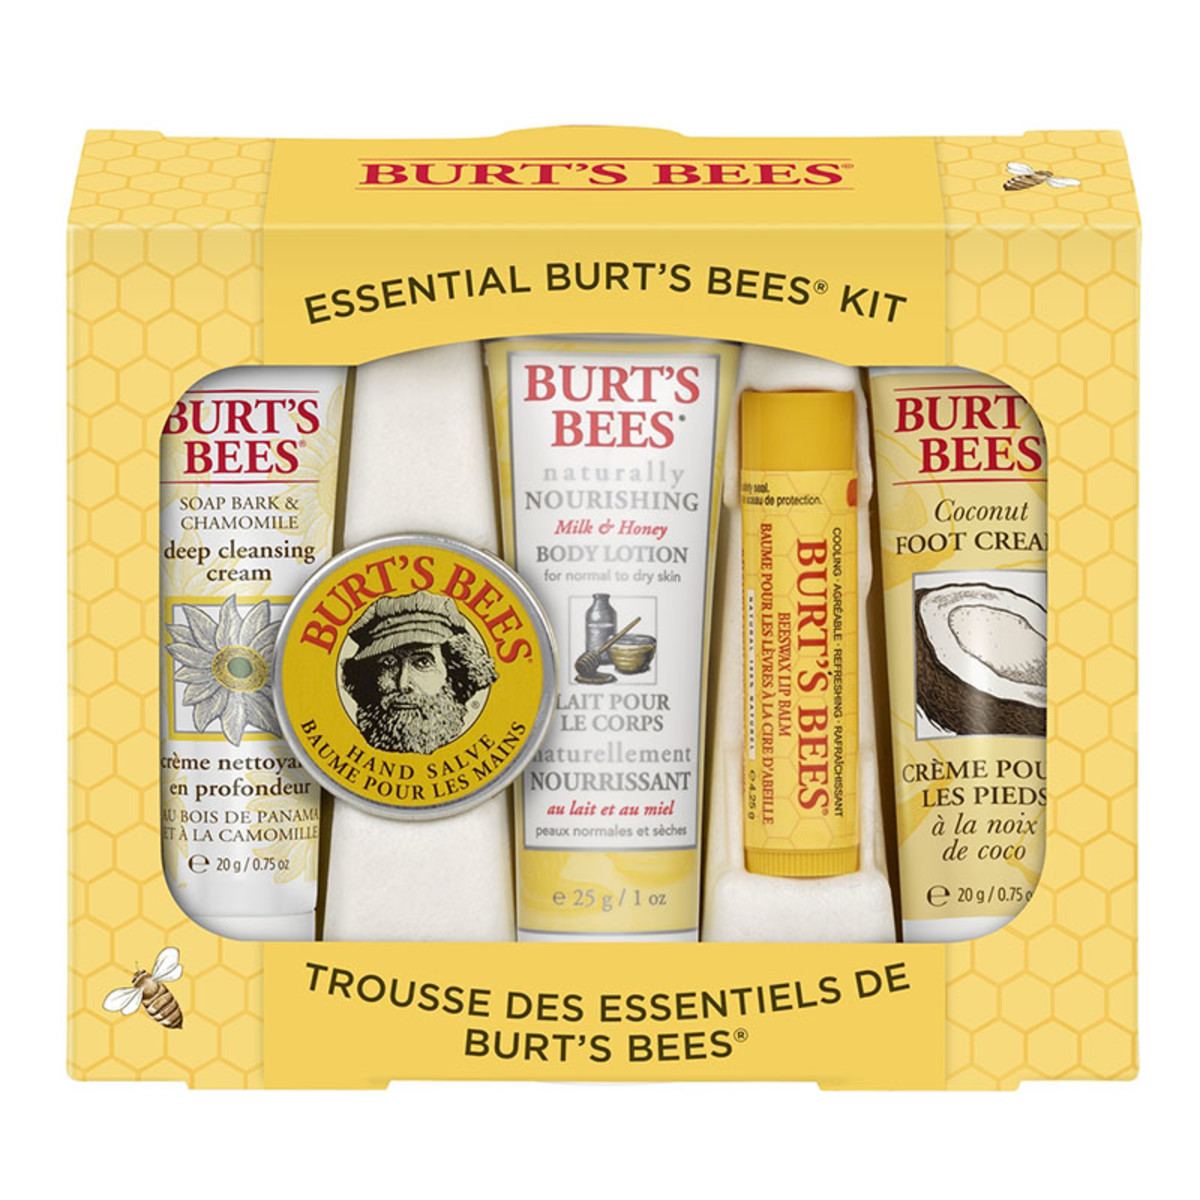 Burt's Bees: My Review of Their Earth-Friendly Products for the Whole Family